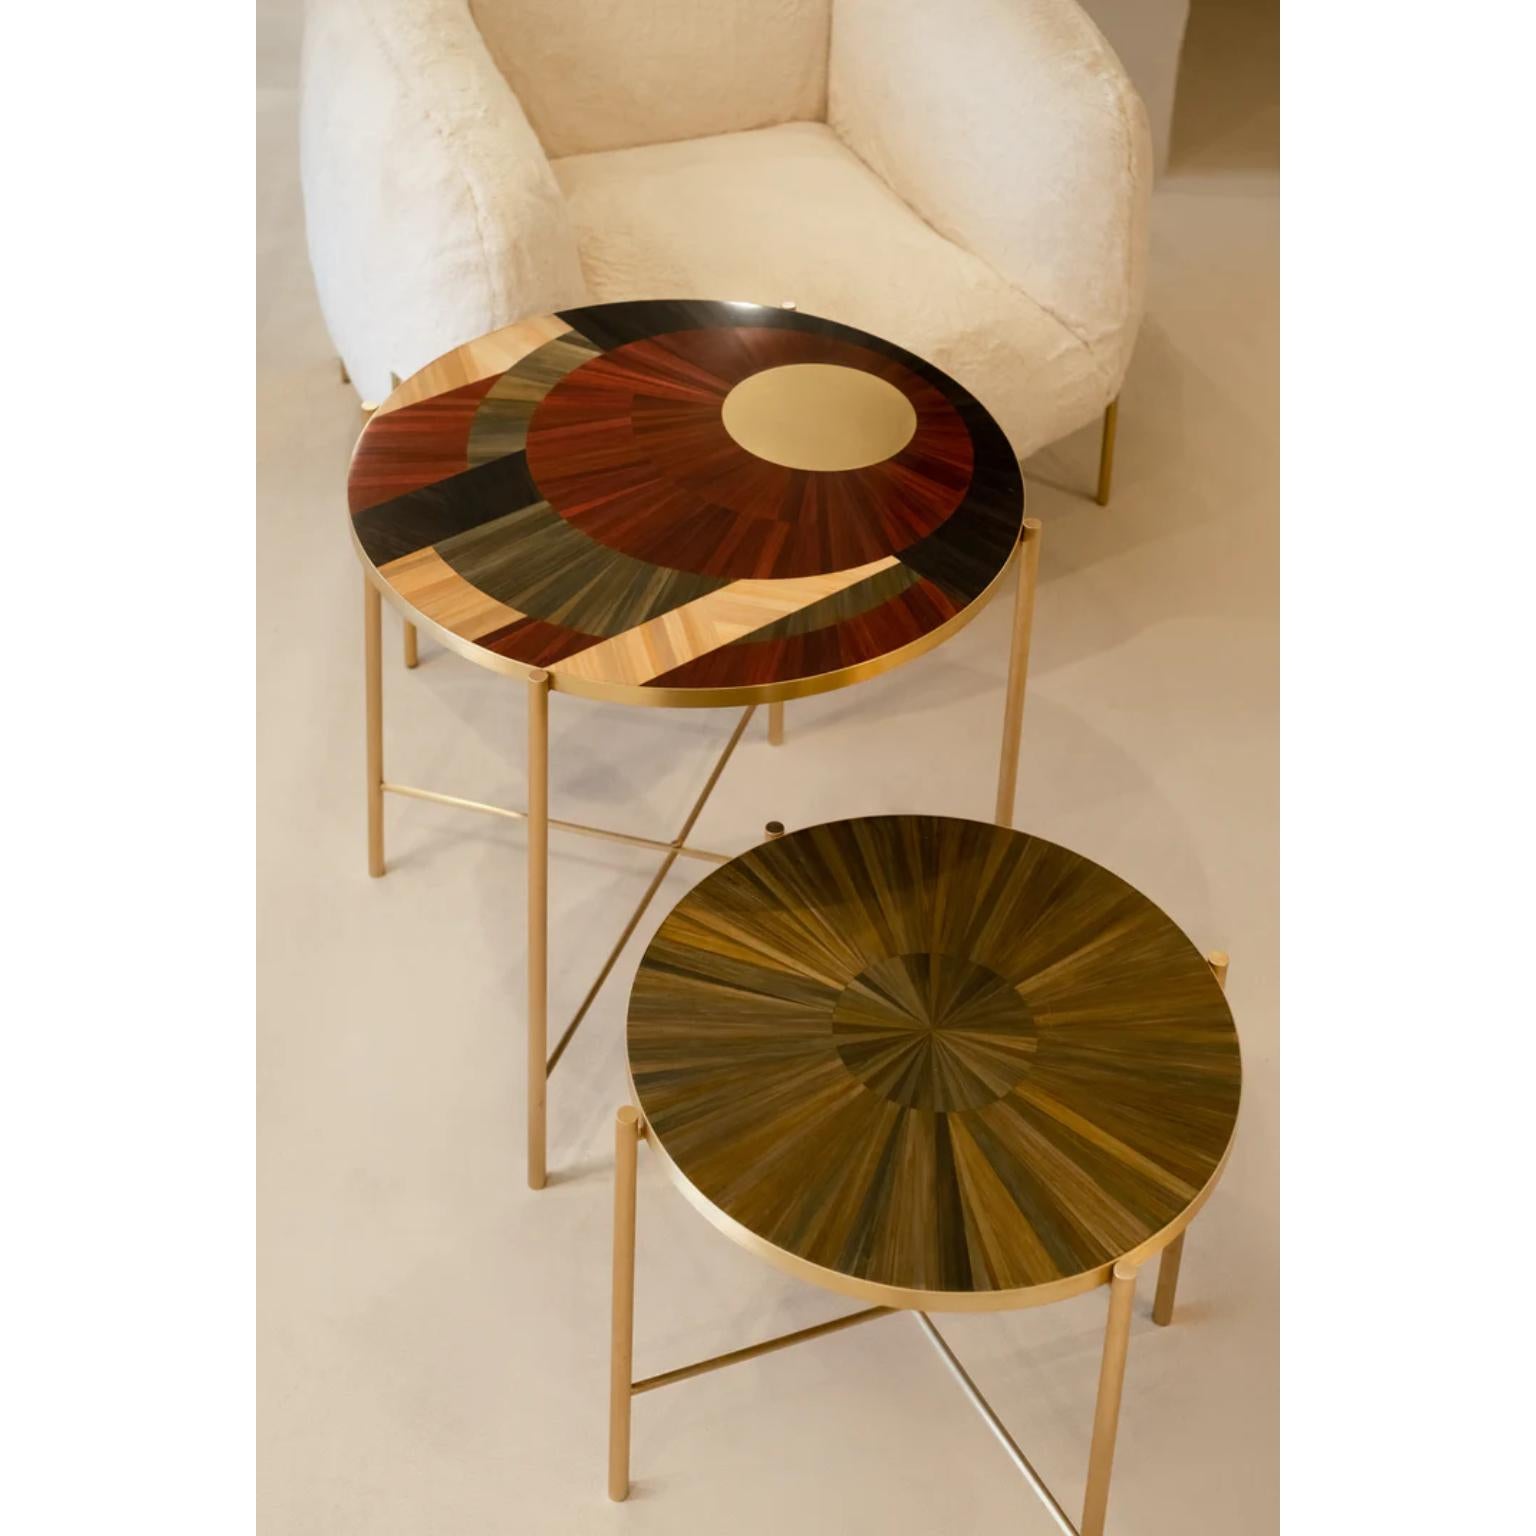 Set Of 2 Solomia 1 Coffee Tables by Ruda Studio
Dimensions: Big Table: Ø 70 x H 40 cm.
Small Table: Ø 45 x H 55 cm.
Materials: Plywood, rye straw inlay and brass.
Weight: 10 kg.

Dimensions are customizable. Available in different color